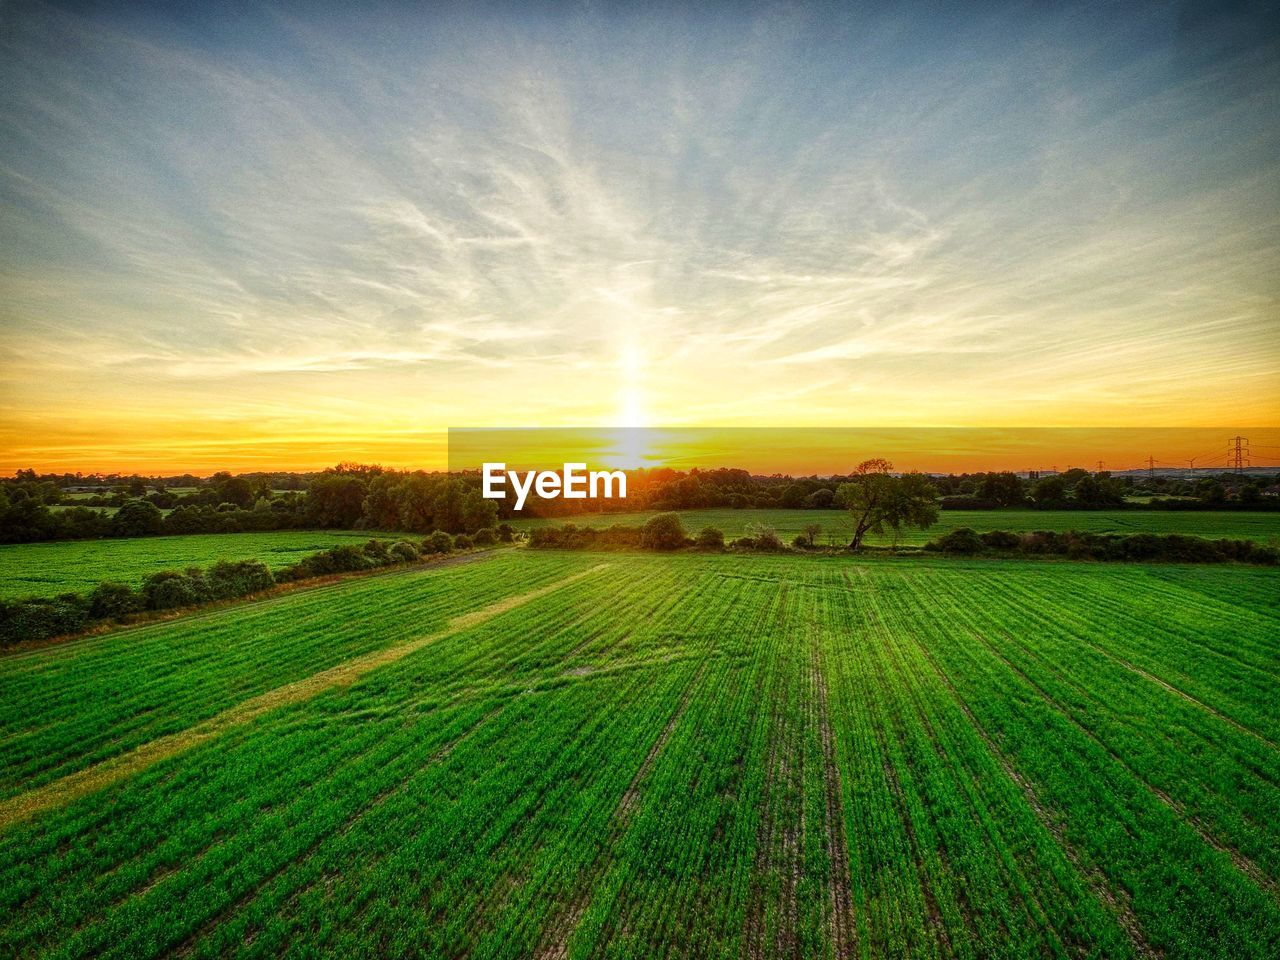 AGRICULTURAL FIELD AGAINST SKY DURING SUNSET